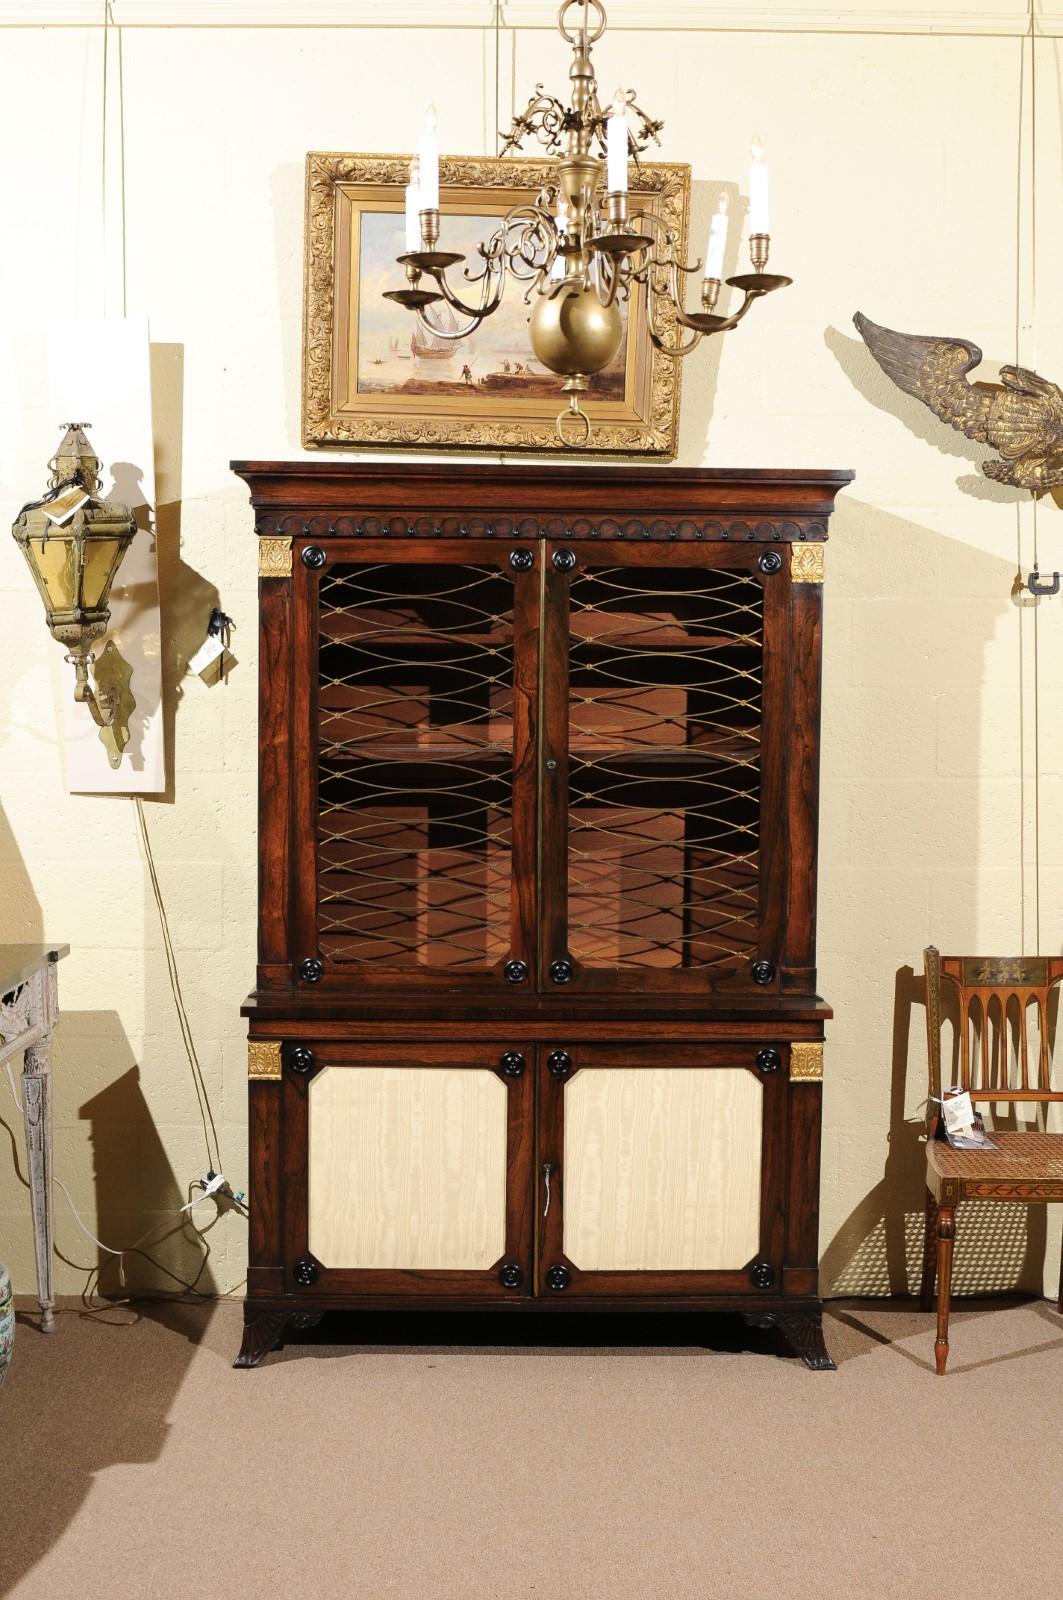 19th Century English Regency Style Rosewood Bookcase/Cabinet with Gilt Accents For Sale 14